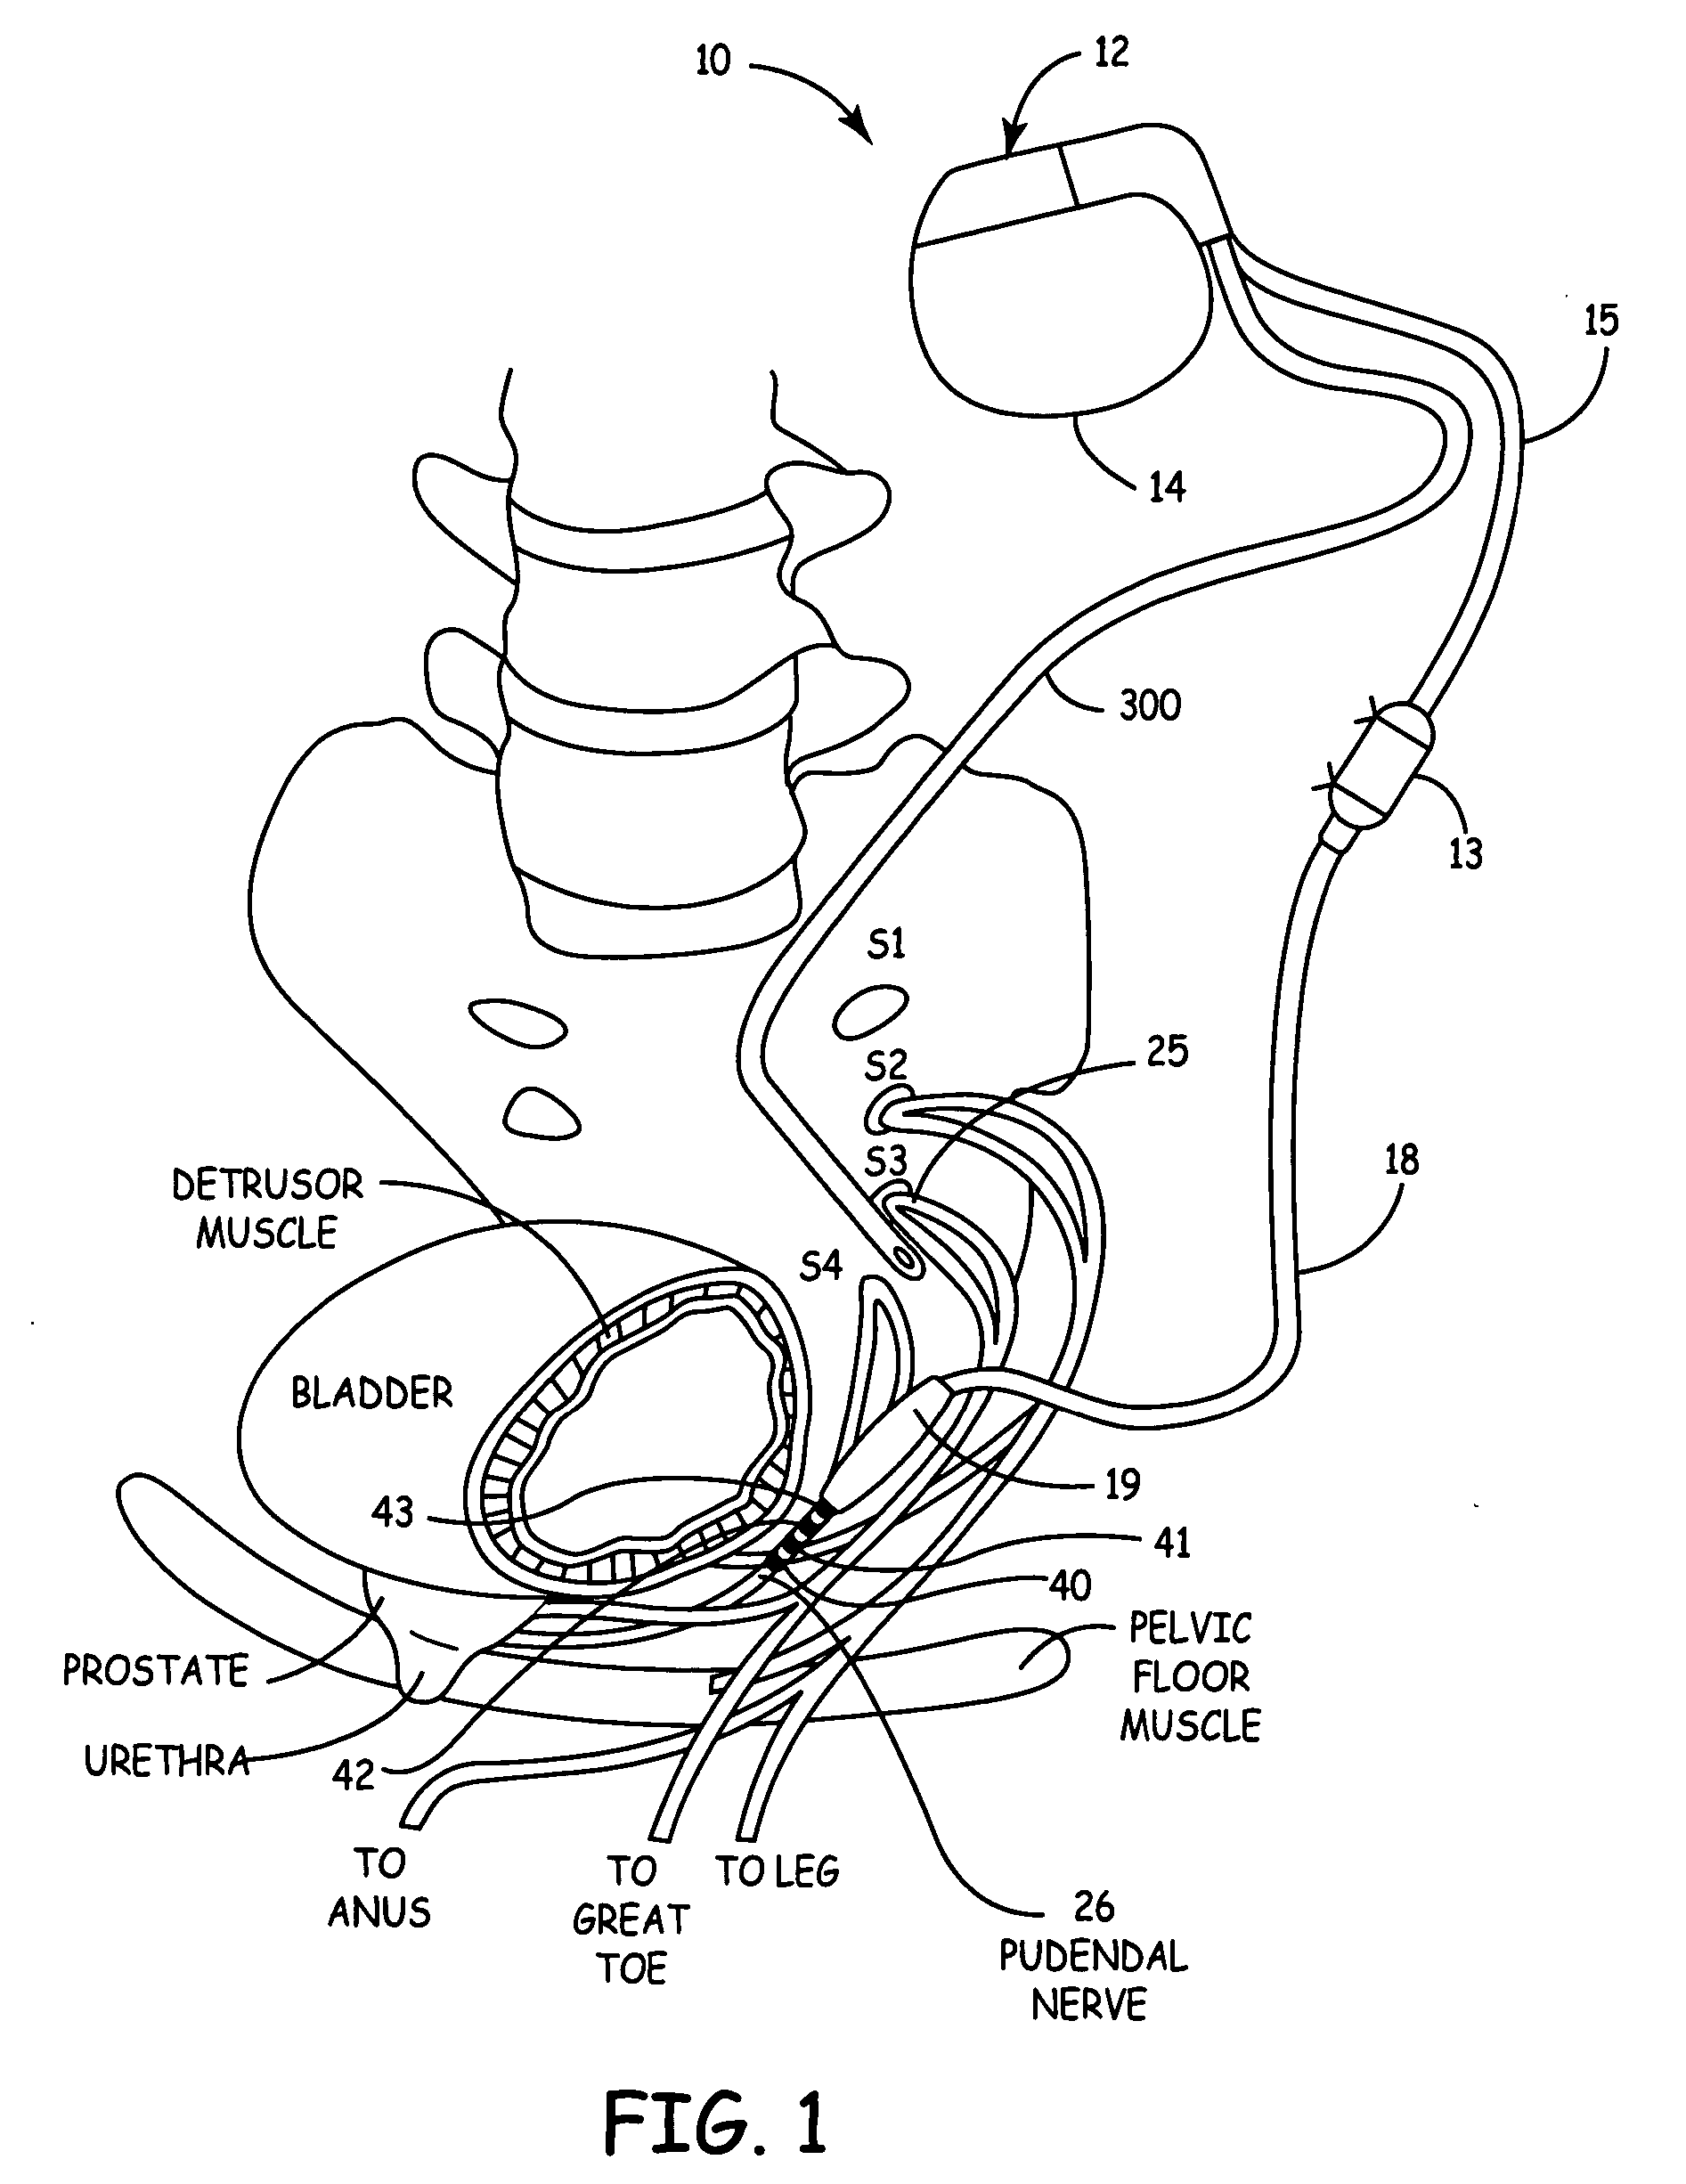 Method, system and device for treating disorders of the pelvic floor by electrical stimulation of and the delivery of drugs to the left and right pudendal nerves